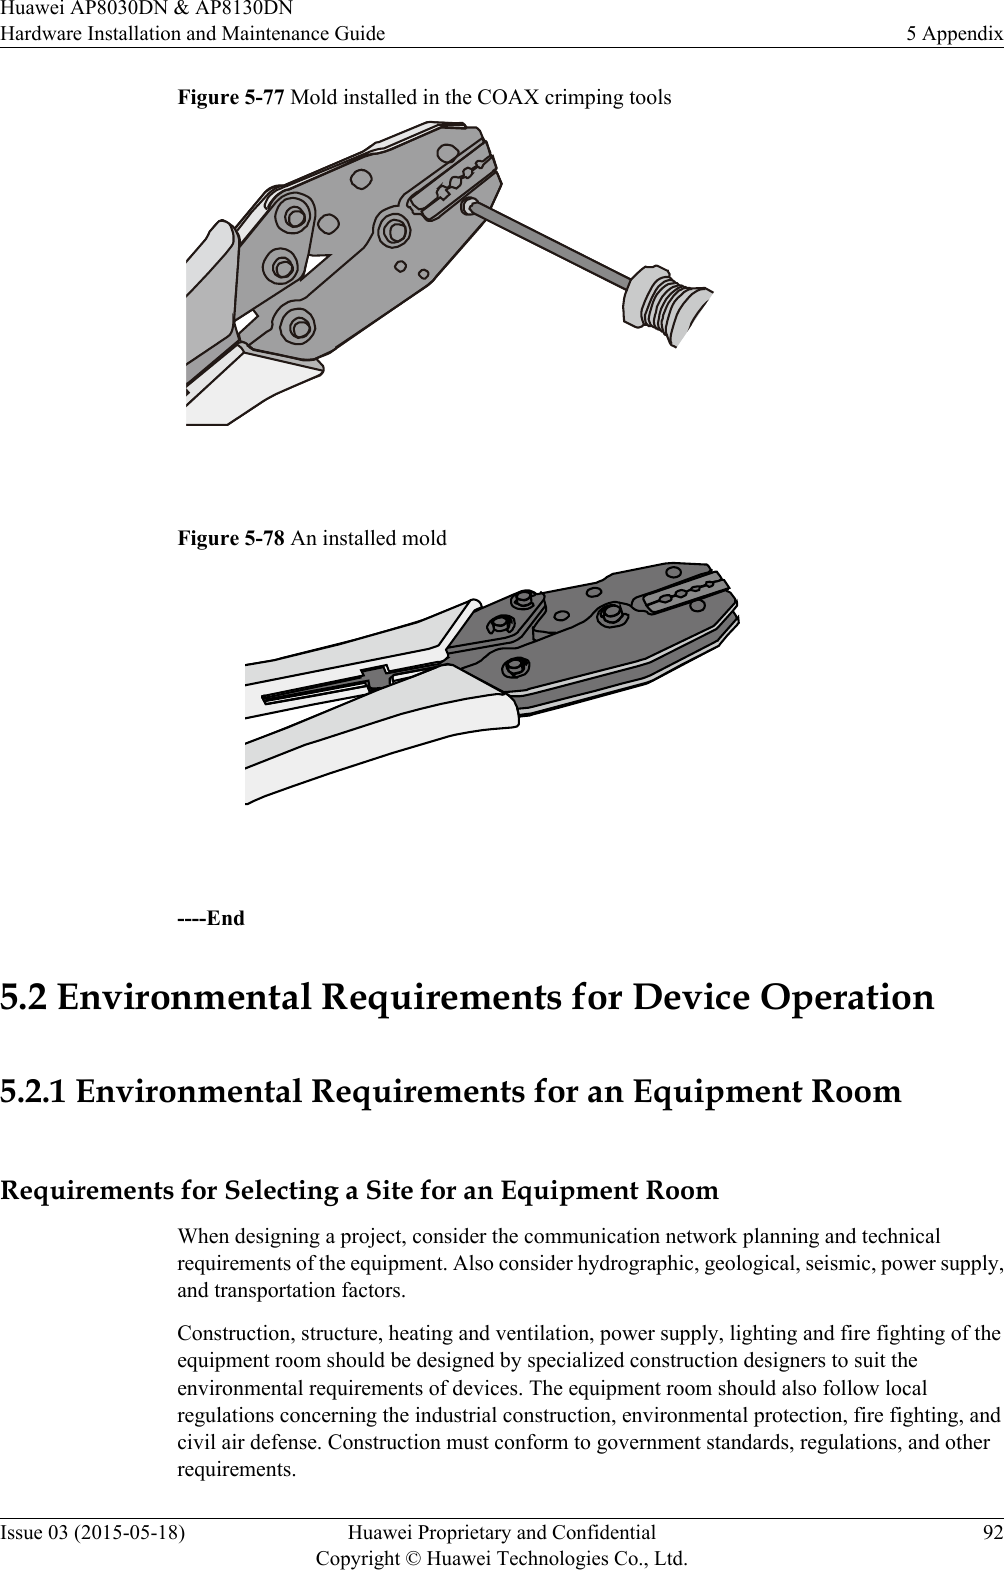 Figure 5-77 Mold installed in the COAX crimping tools Figure 5-78 An installed mold ----End5.2 Environmental Requirements for Device Operation5.2.1 Environmental Requirements for an Equipment RoomRequirements for Selecting a Site for an Equipment RoomWhen designing a project, consider the communication network planning and technicalrequirements of the equipment. Also consider hydrographic, geological, seismic, power supply,and transportation factors.Construction, structure, heating and ventilation, power supply, lighting and fire fighting of theequipment room should be designed by specialized construction designers to suit theenvironmental requirements of devices. The equipment room should also follow localregulations concerning the industrial construction, environmental protection, fire fighting, andcivil air defense. Construction must conform to government standards, regulations, and otherrequirements.Huawei AP8030DN &amp; AP8130DNHardware Installation and Maintenance Guide 5 AppendixIssue 03 (2015-05-18) Huawei Proprietary and ConfidentialCopyright © Huawei Technologies Co., Ltd.92